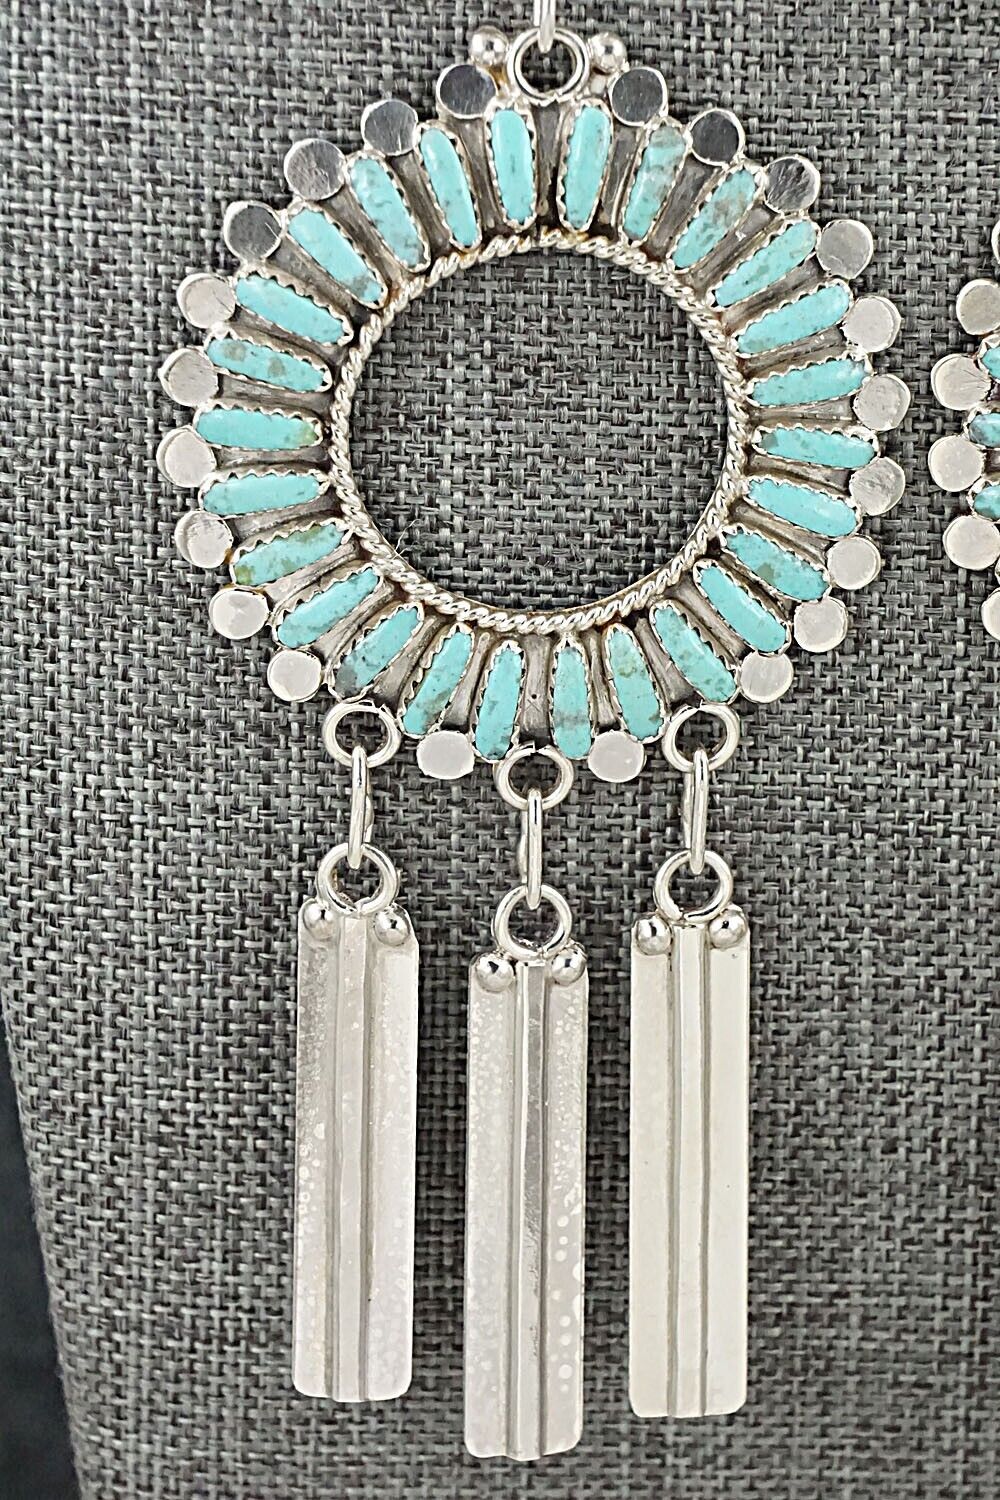 Turquoise and Sterling Silver Earrings - Virginia Byjoe